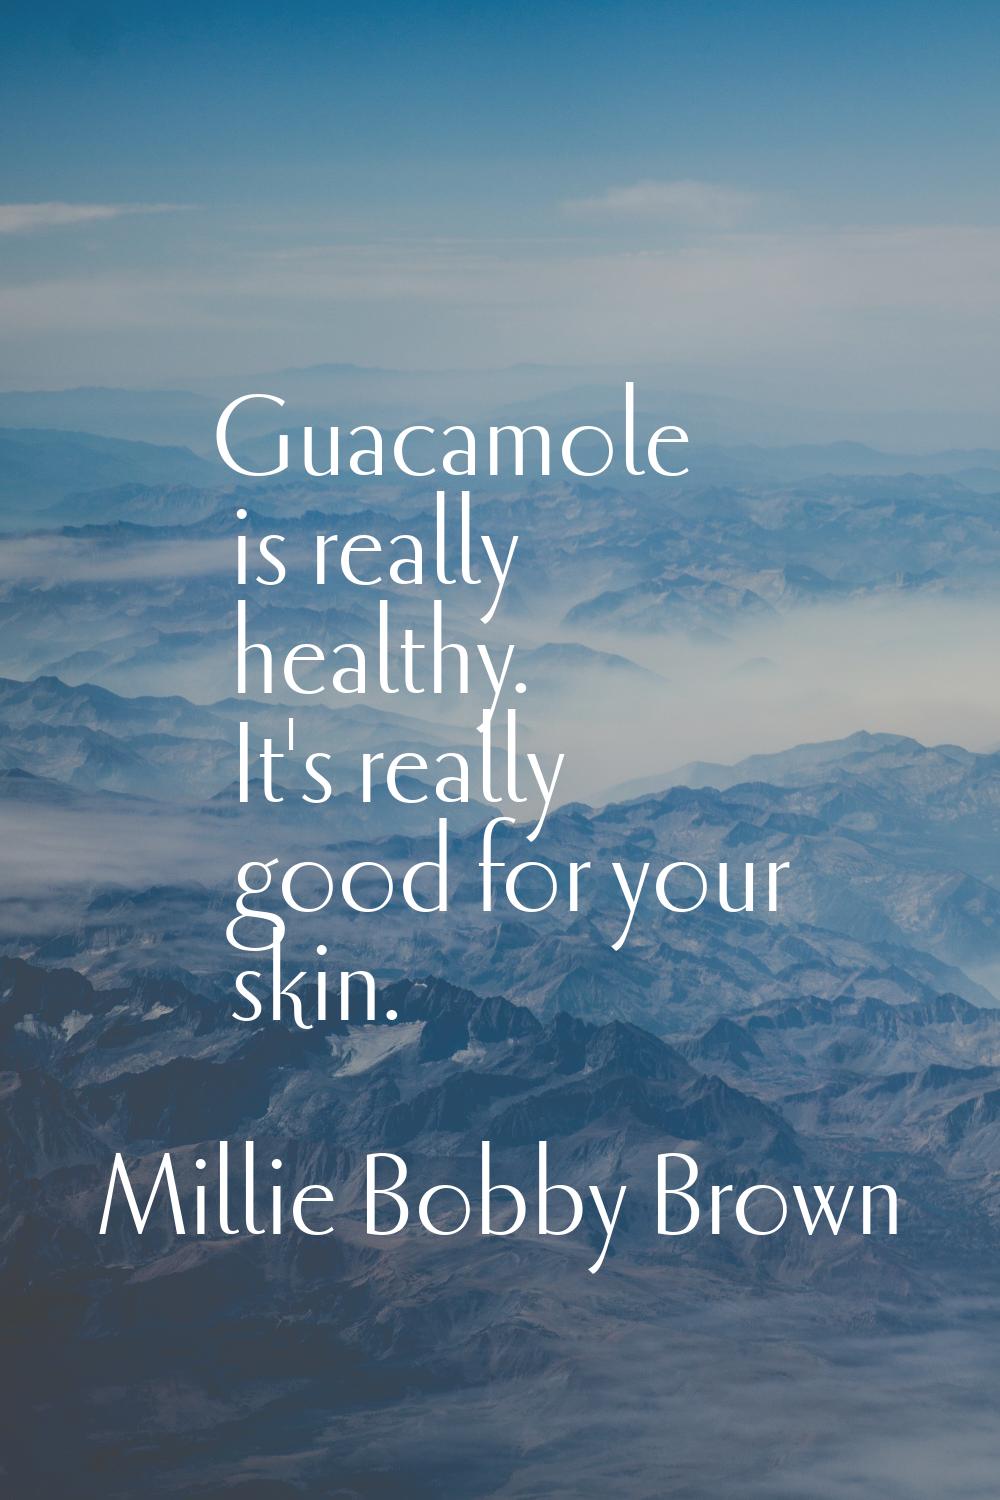 Guacamole is really healthy. It's really good for your skin.